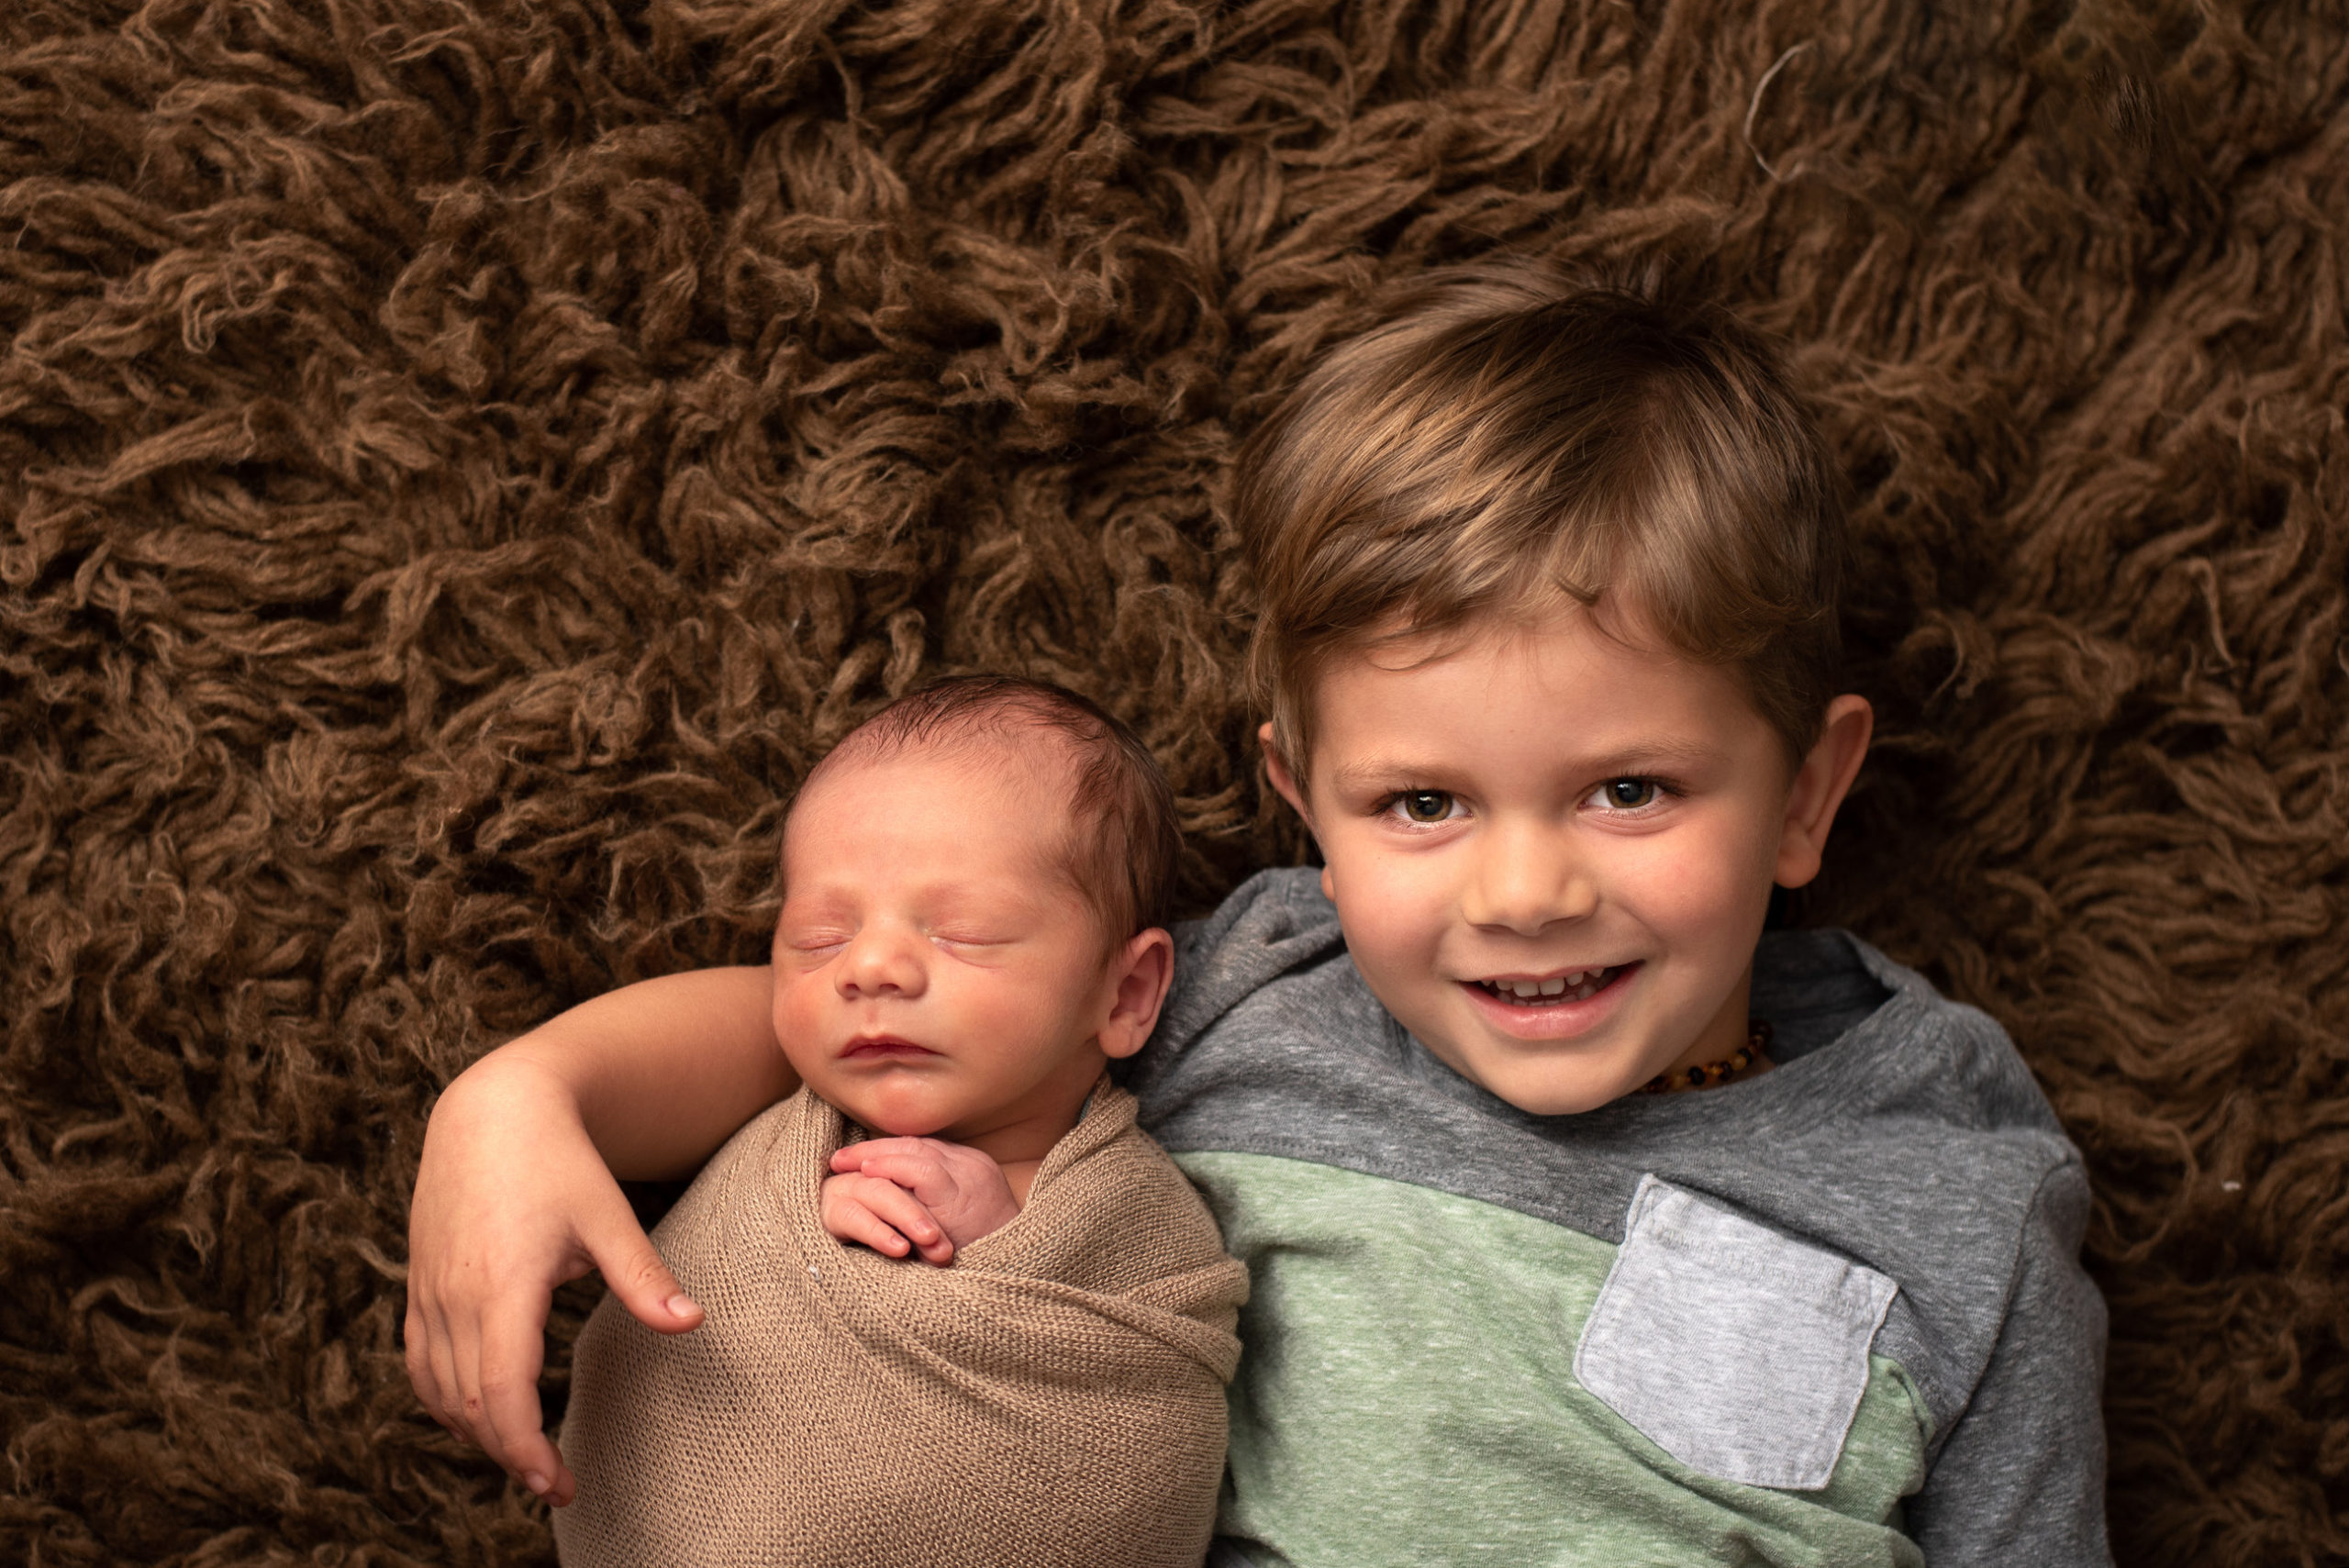 How long does a newborn photo session take? Newborn baby and sibling on flokati